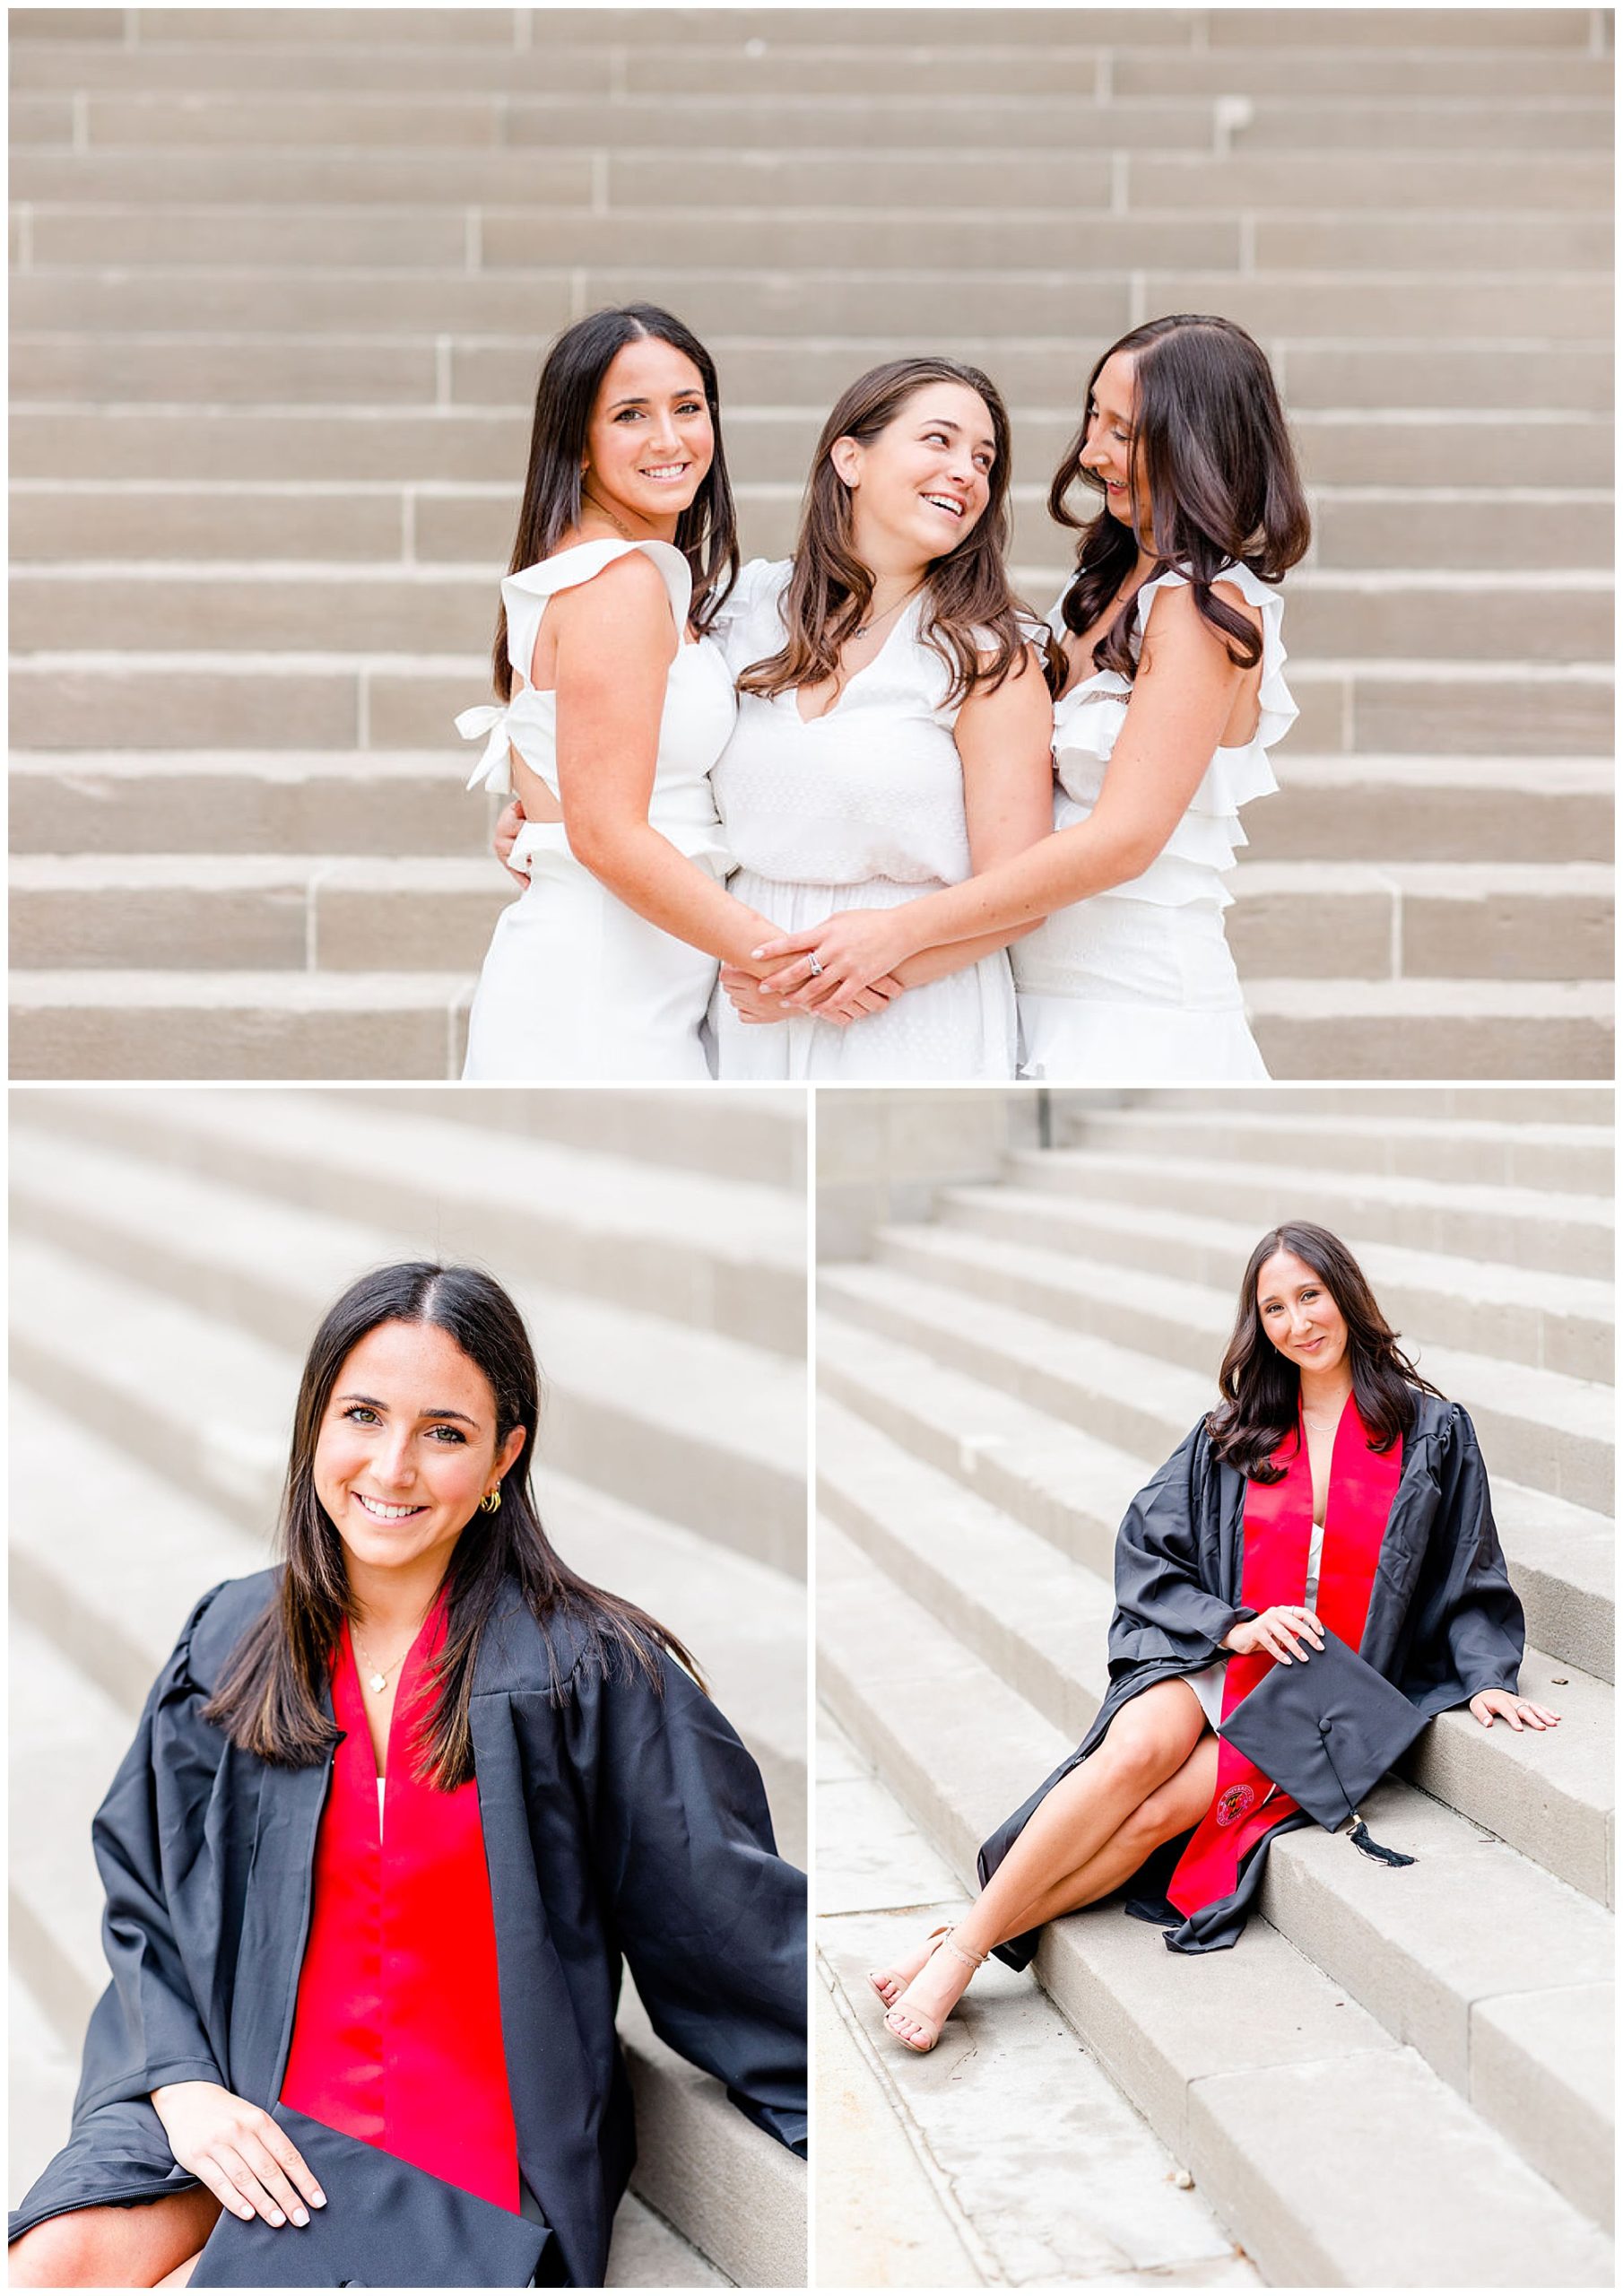 UMD group graduation photos, University of Maryland graduation photos, UMD graduates, D.C. graduation photographer, group graduation photos, senior portraits, Rachel E.H. Photography, three women looking at each other, woman sitting on marble steps, woman in cap and gown